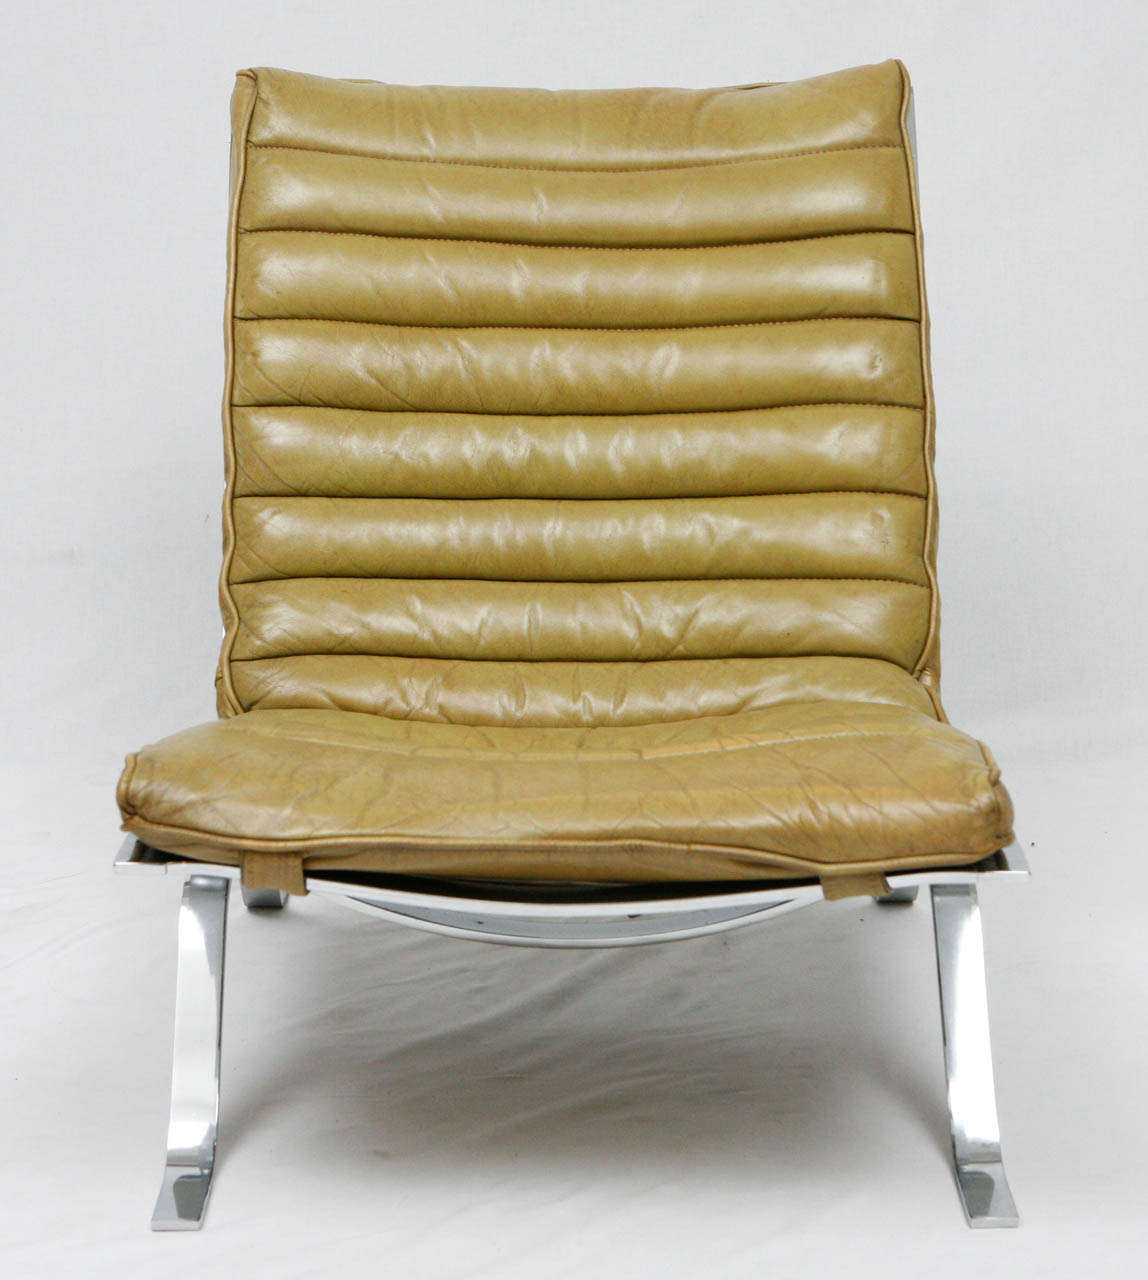 Arne Norell lounge chair designed in 1966 and produced by Norell Mobler.